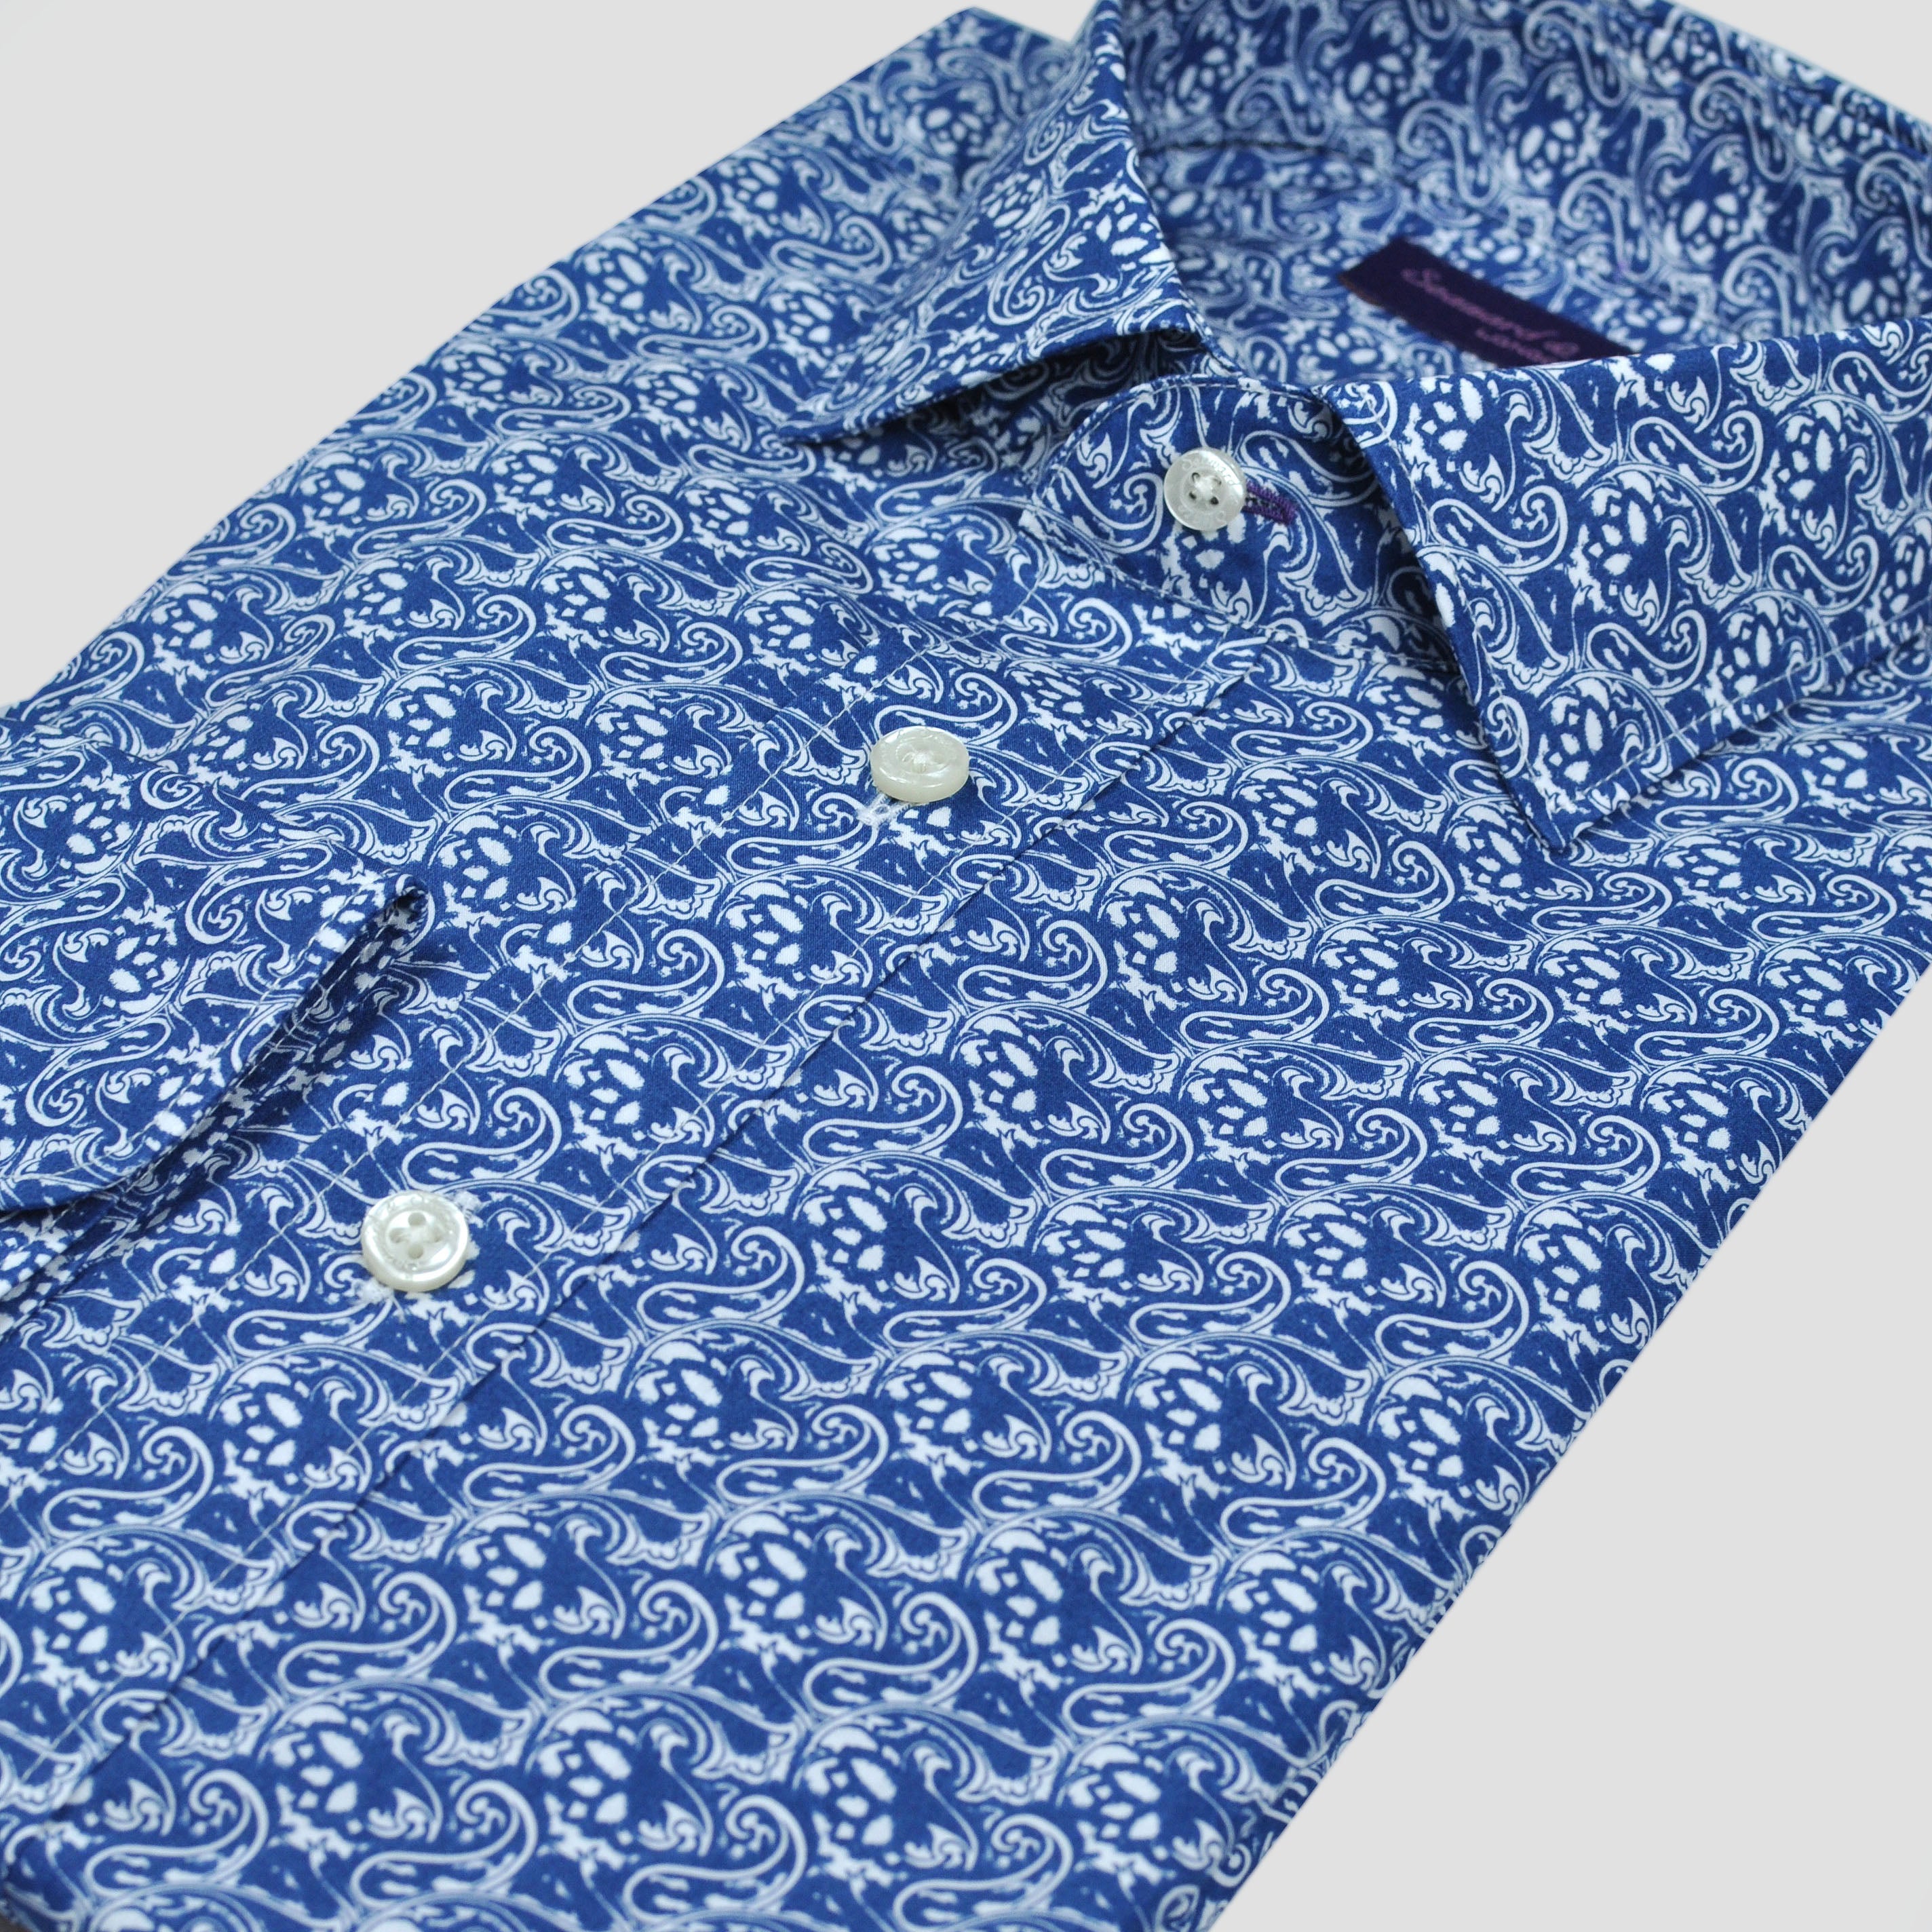 Neat Paisley Spread Collar Shirt in Blue